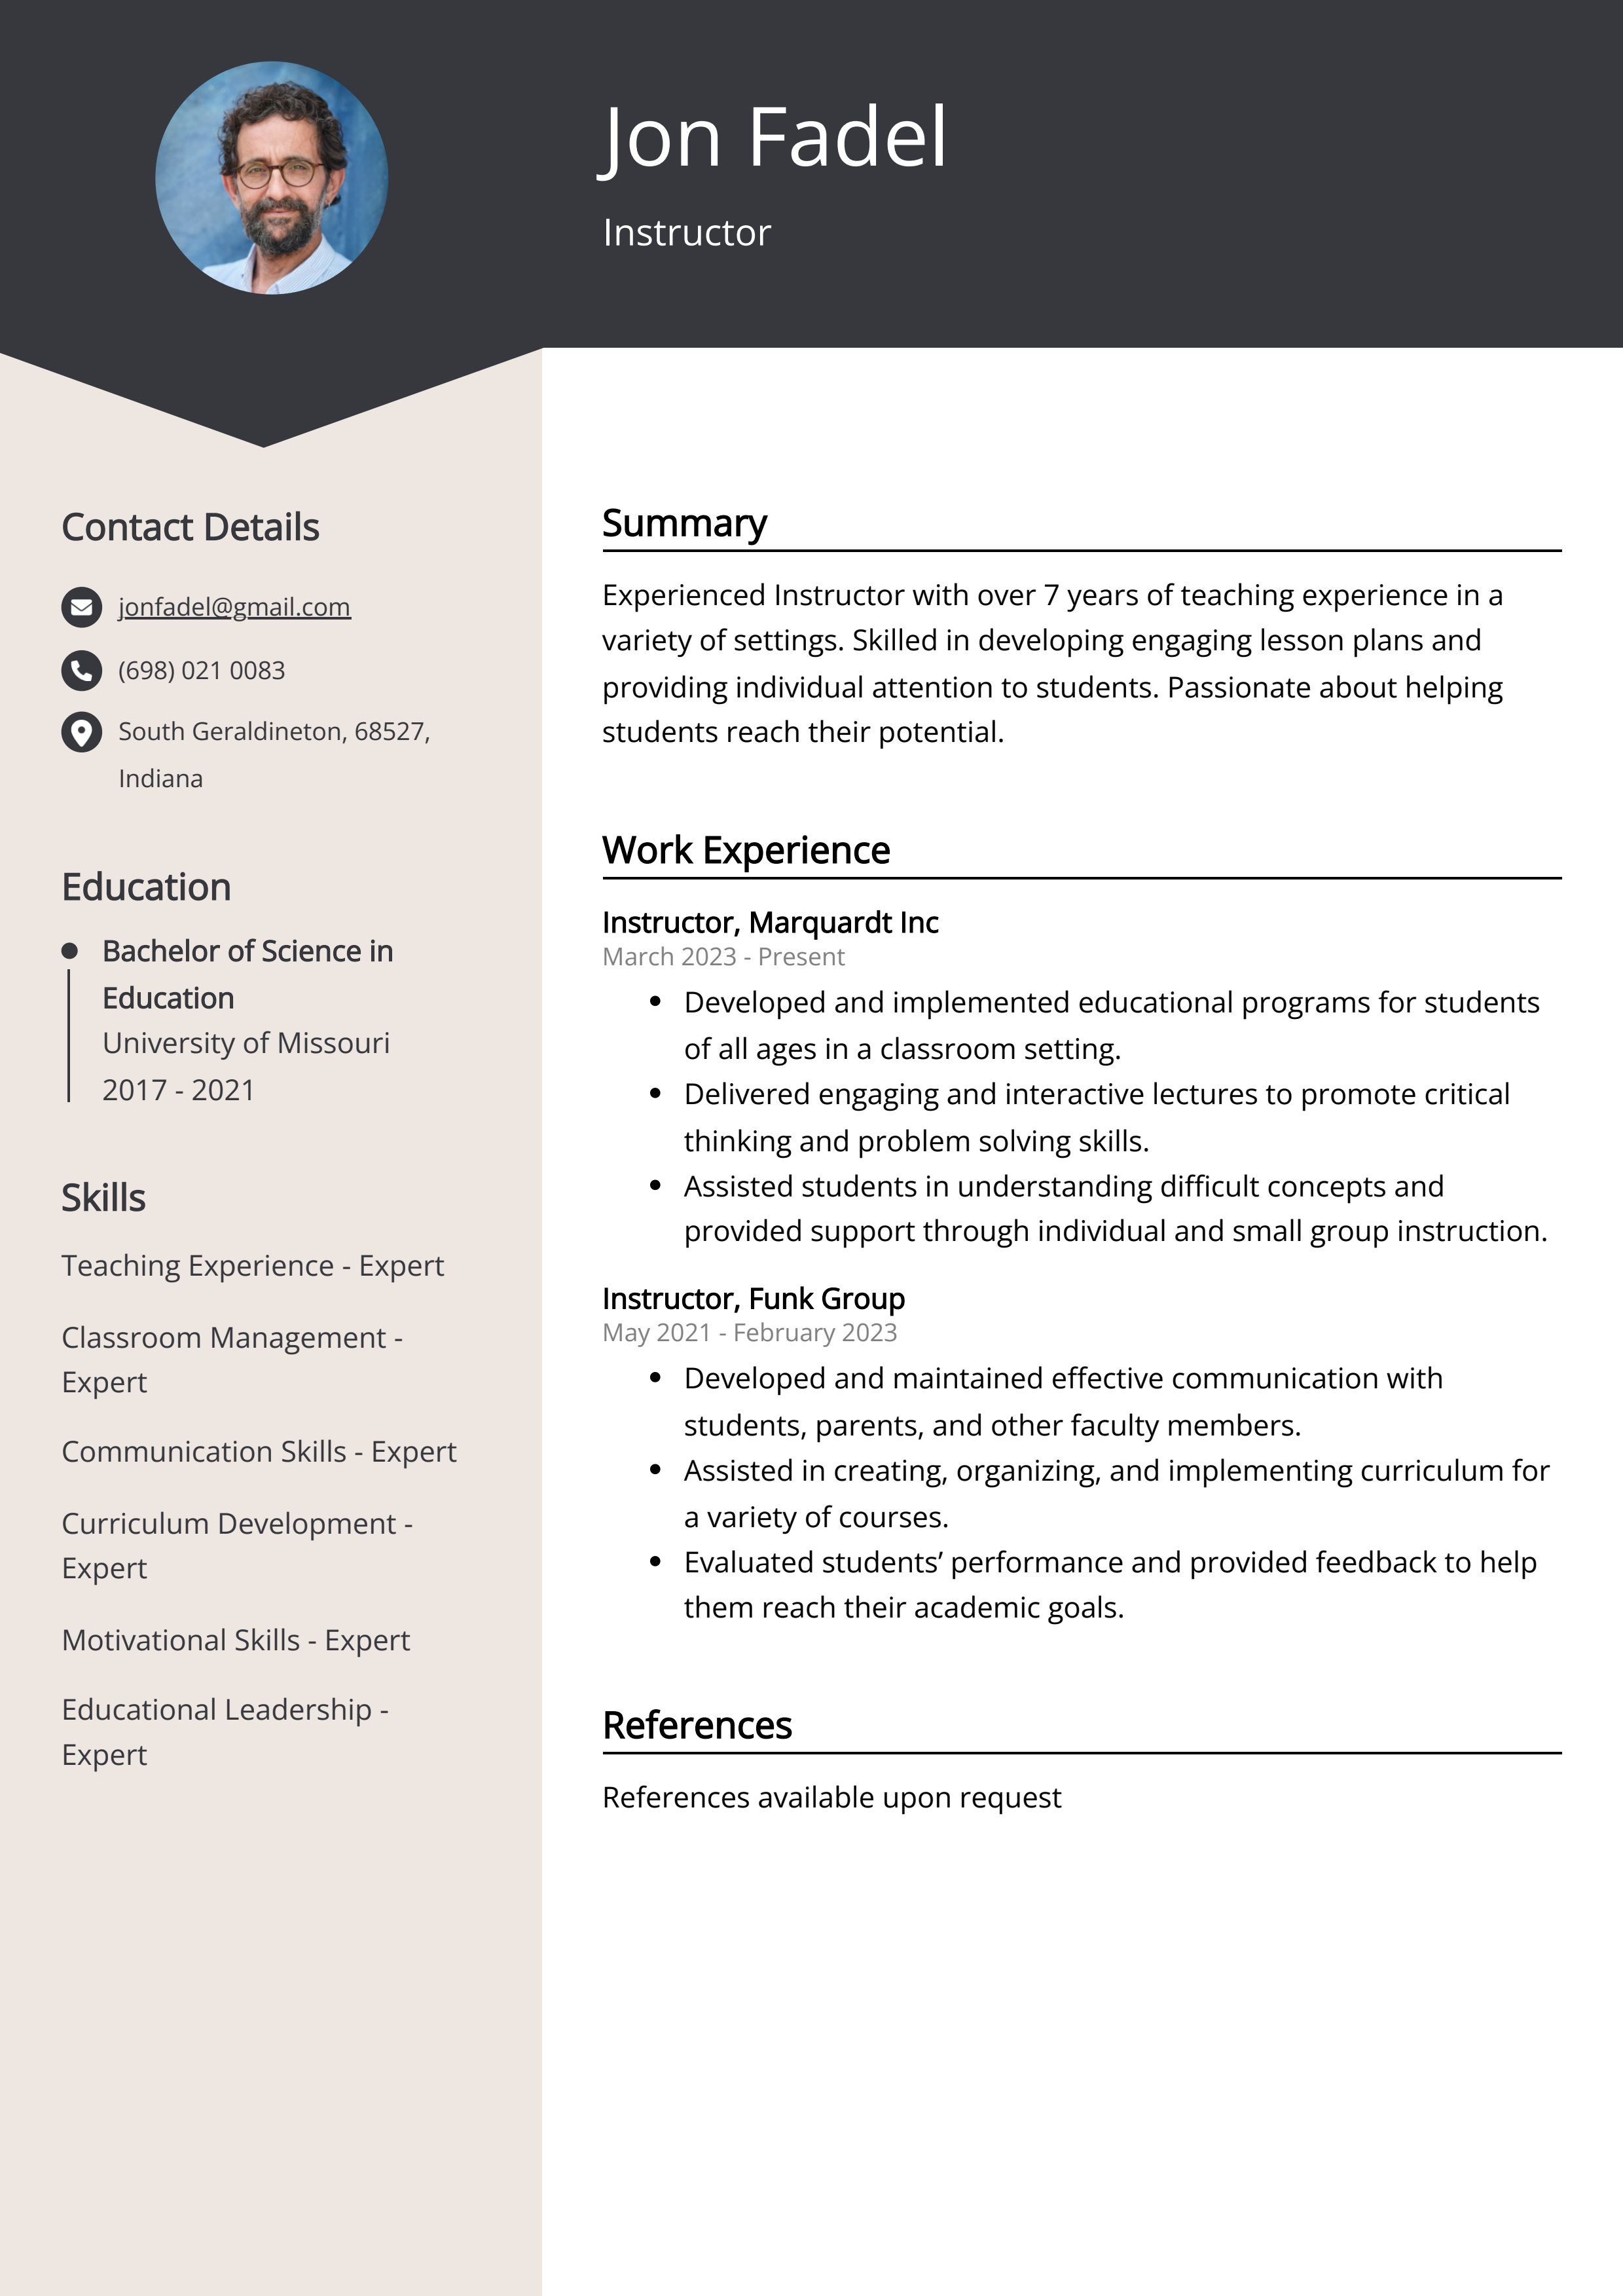 Instructor Resume Example